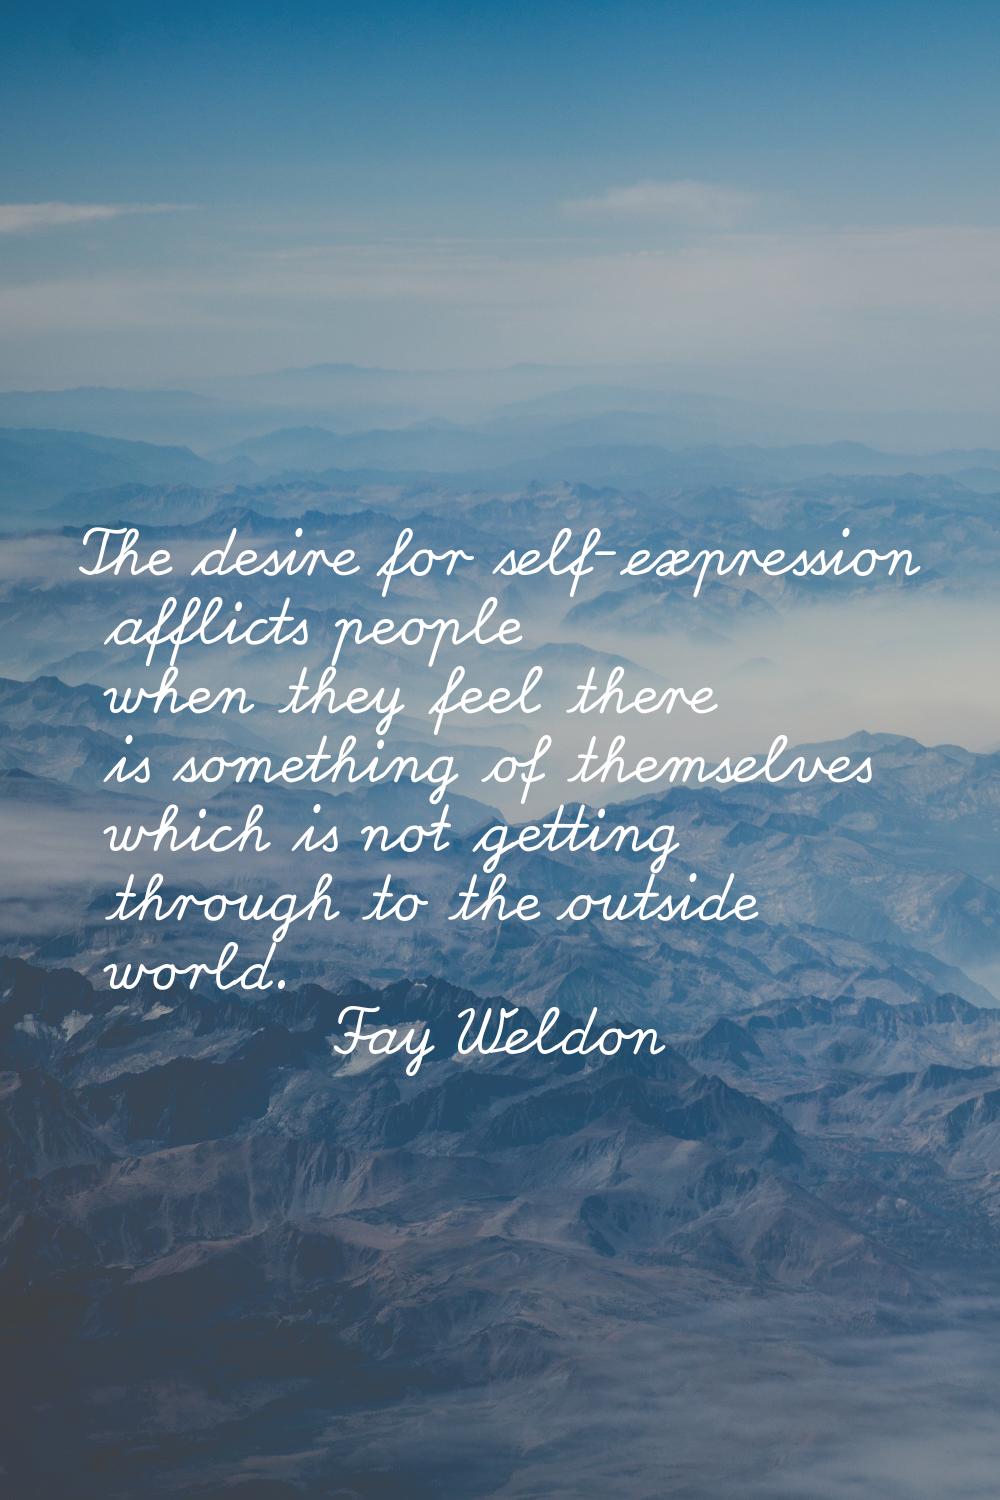 The desire for self-expression afflicts people when they feel there is something of themselves whic